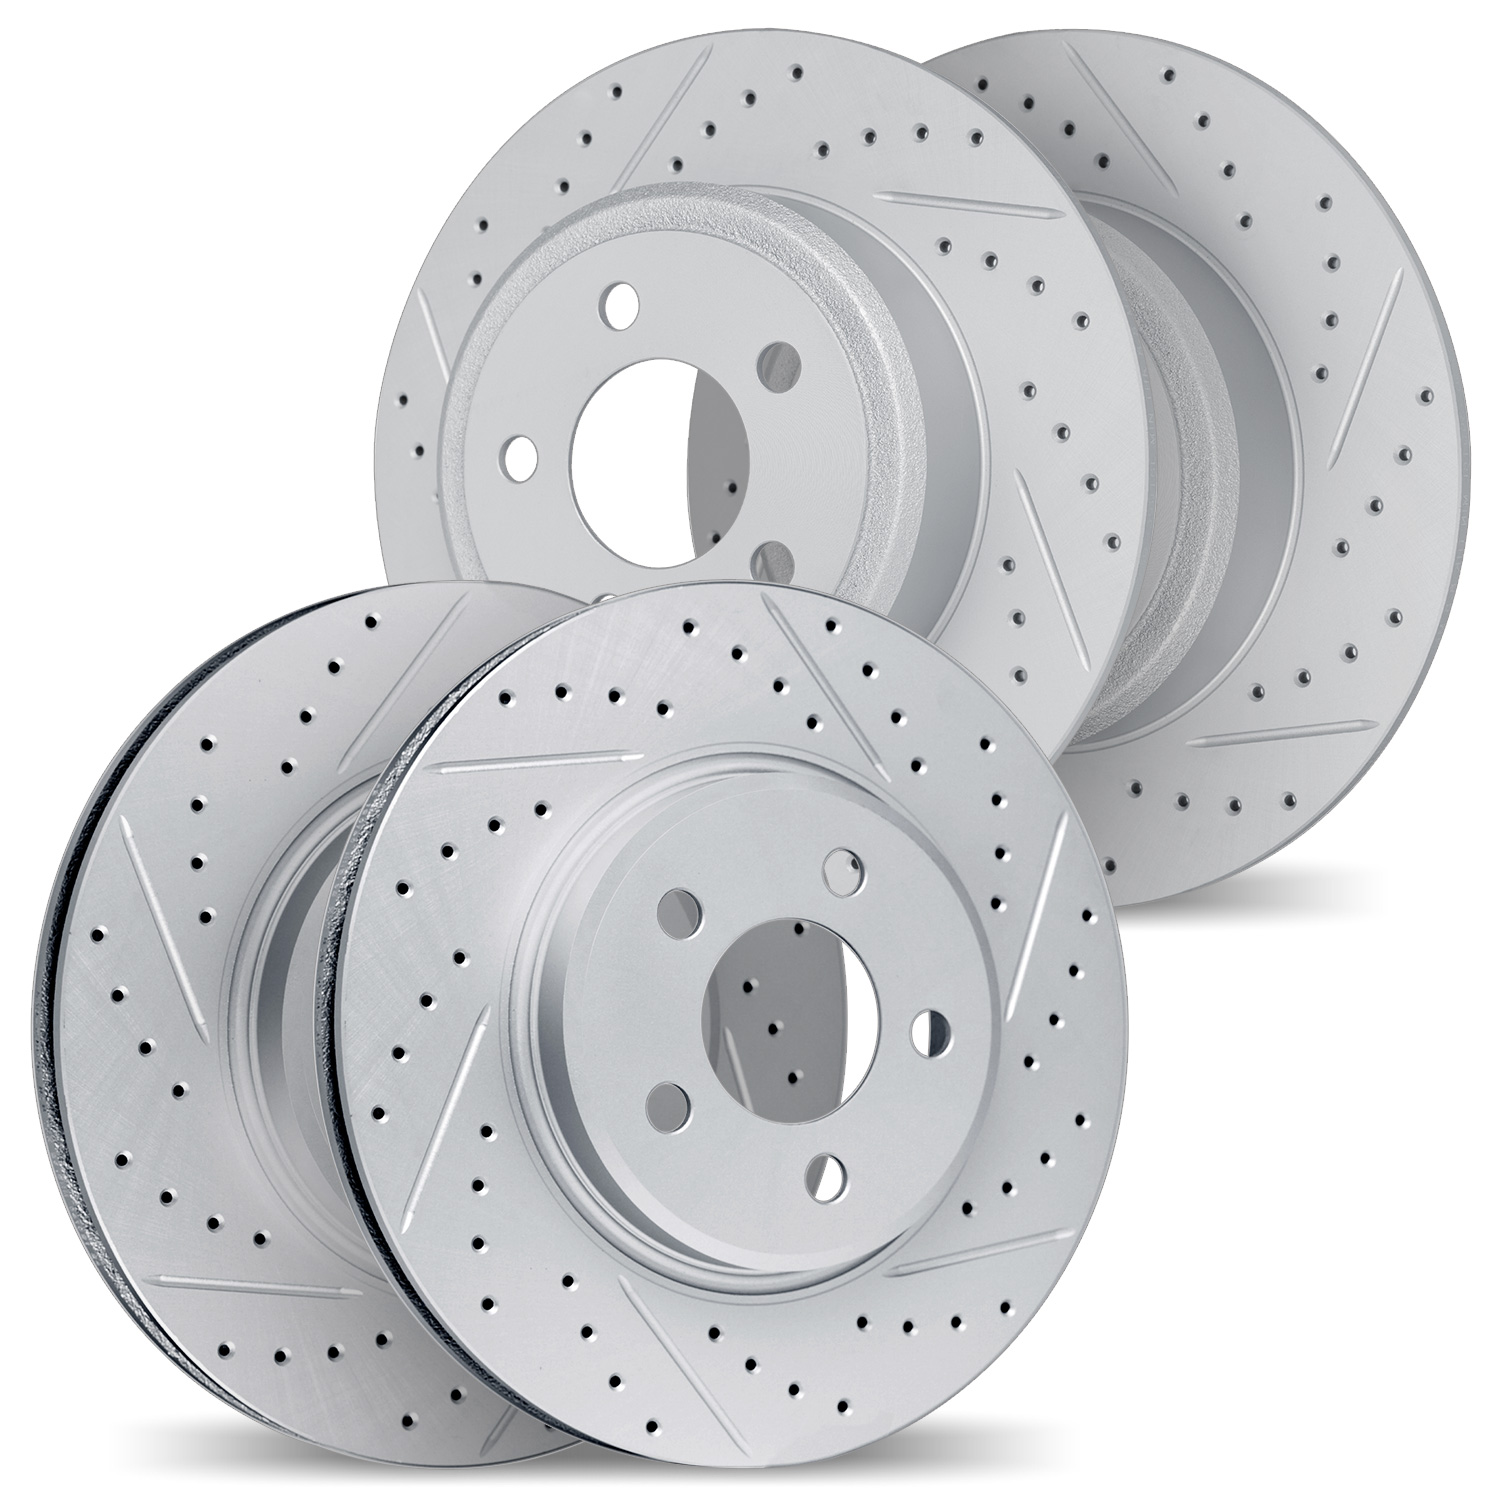 2004-73022 Geoperformance Drilled/Slotted Brake Rotors, 1999-2002 Audi/Volkswagen, Position: Front and Rear